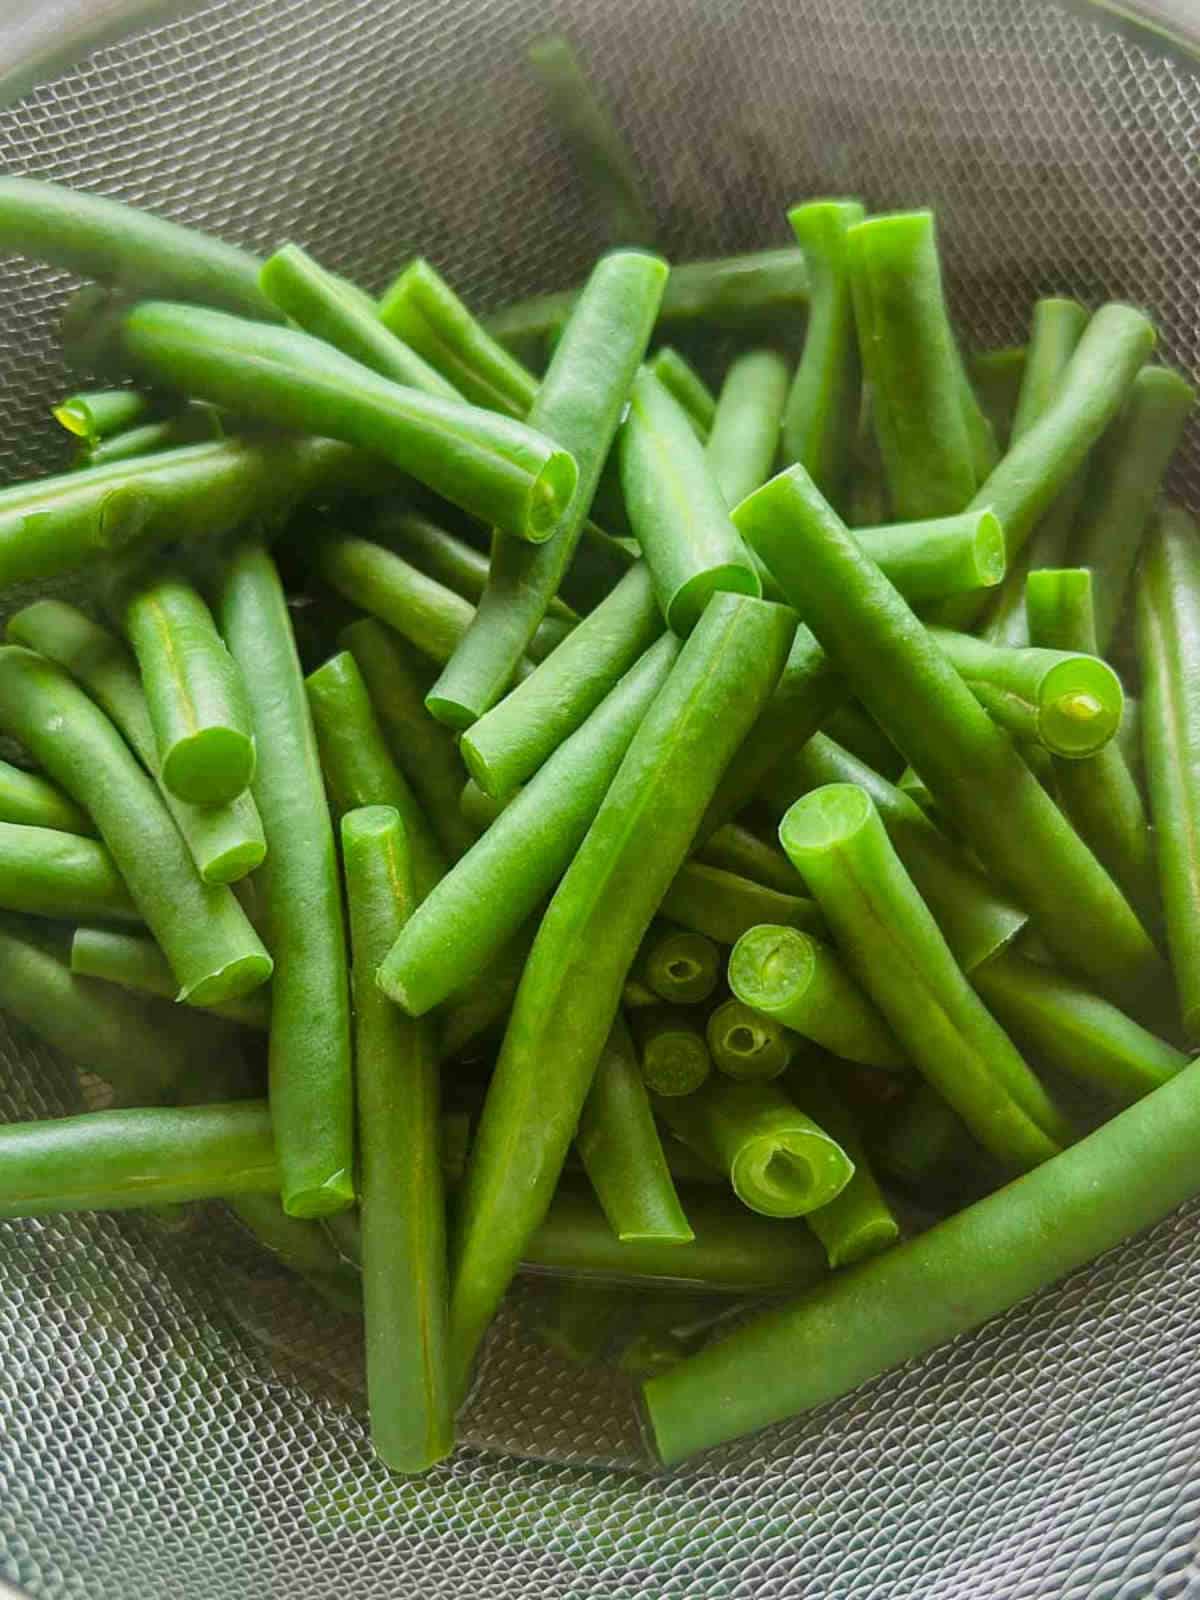 Blanch the green beans for 5 minutes in boiling water.